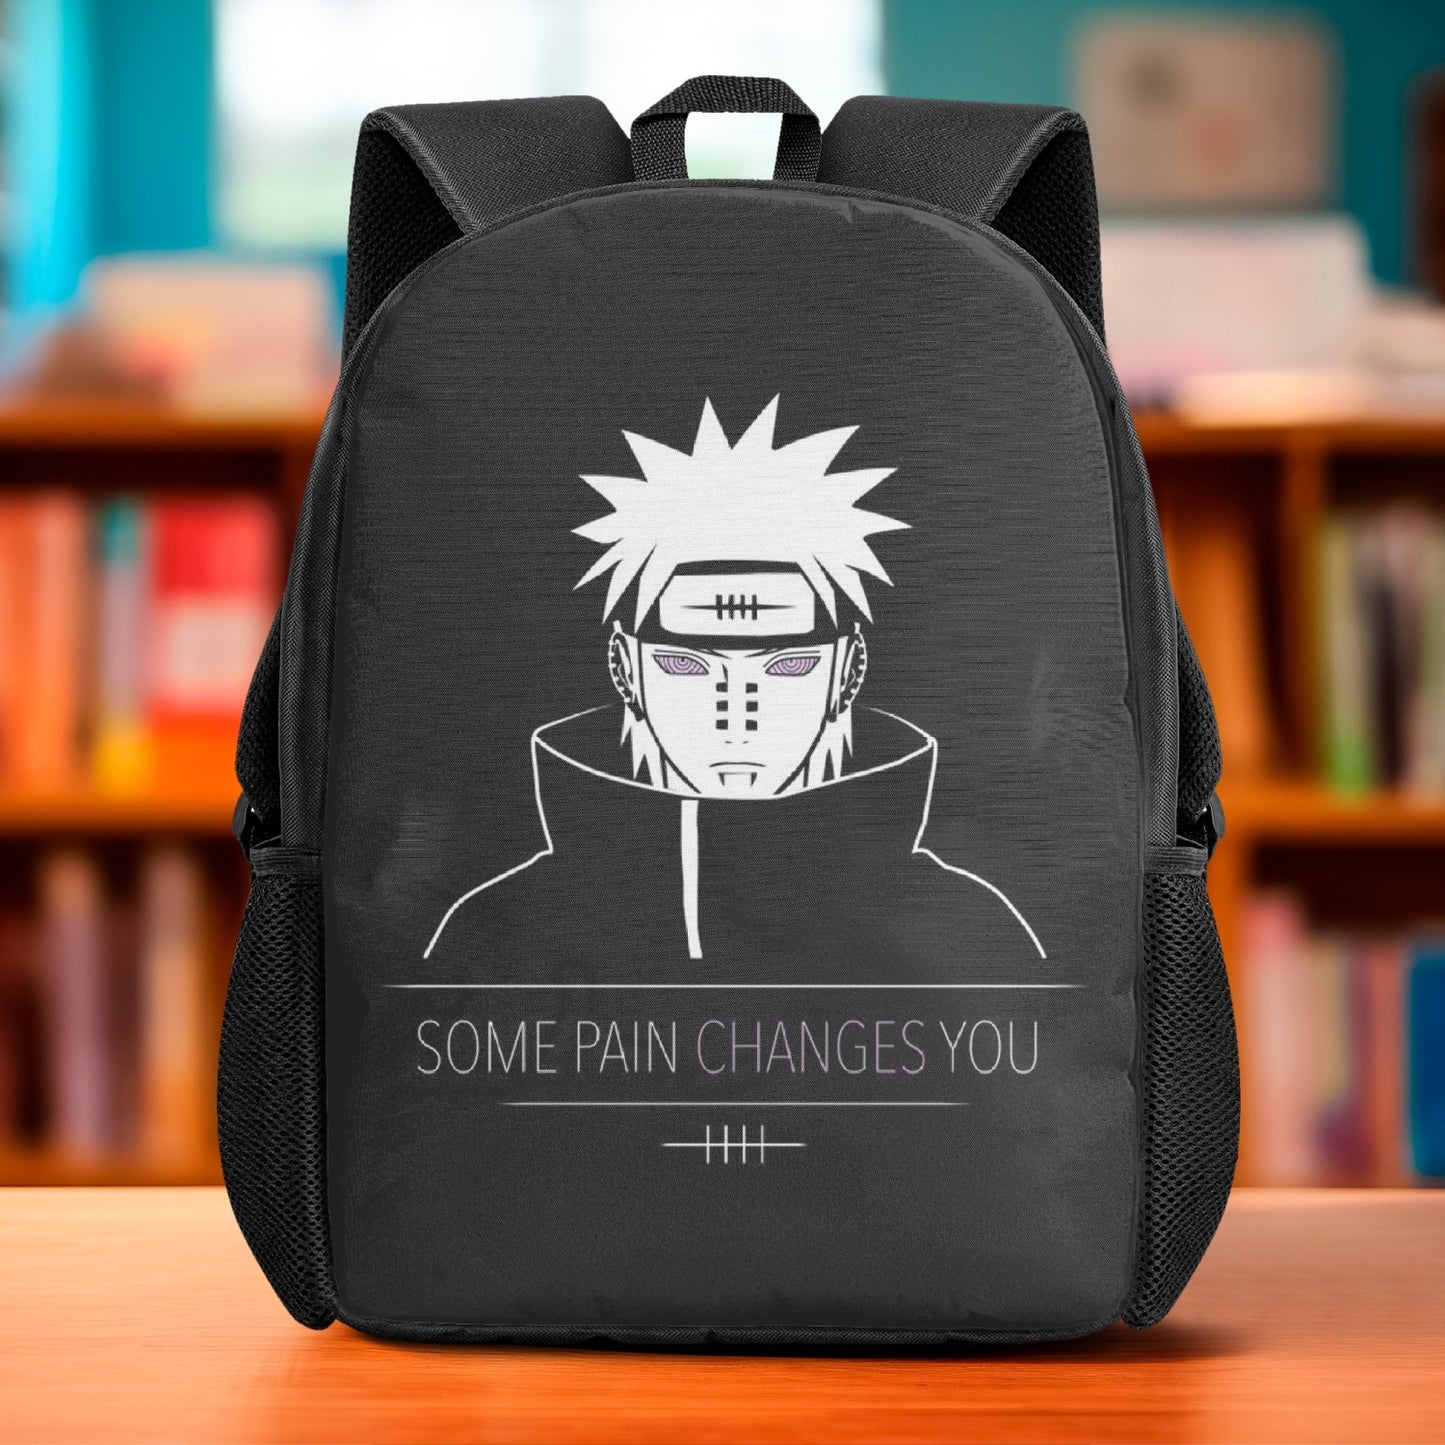 PAIN Laptop Backpack